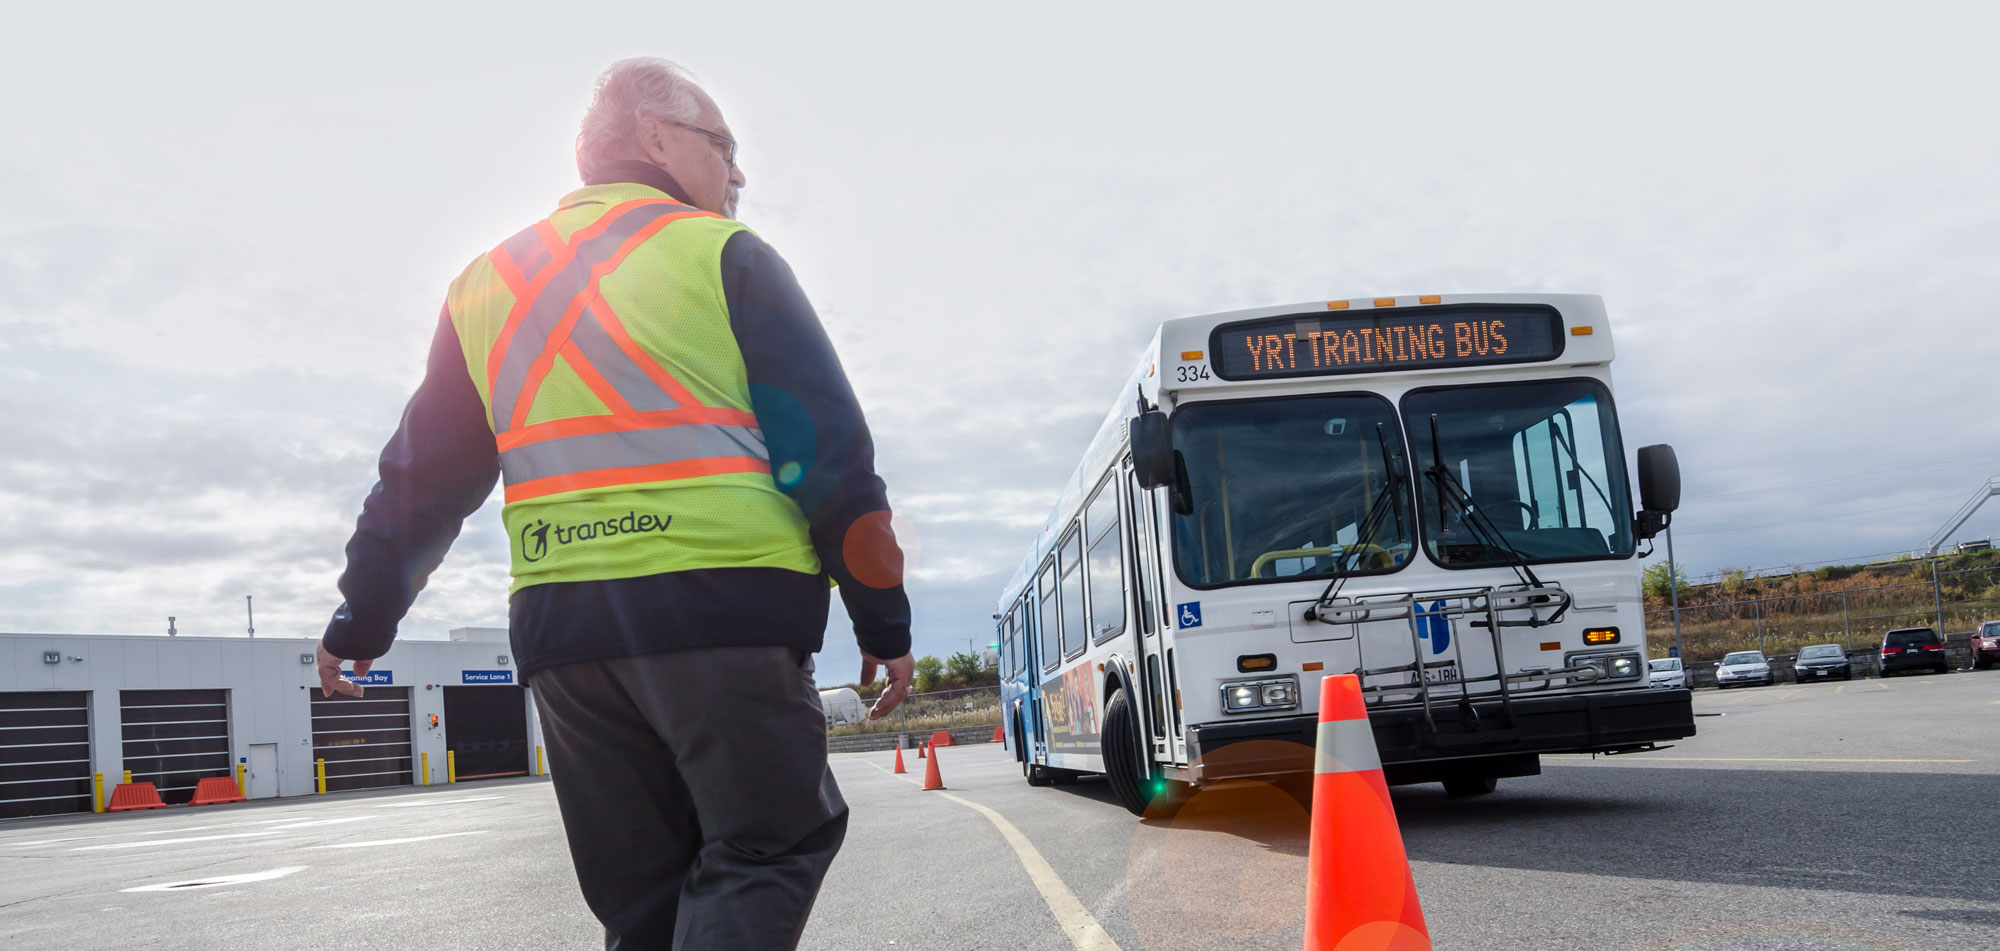 Safety Employee checking safety cones near bus in preparation for a day of travel